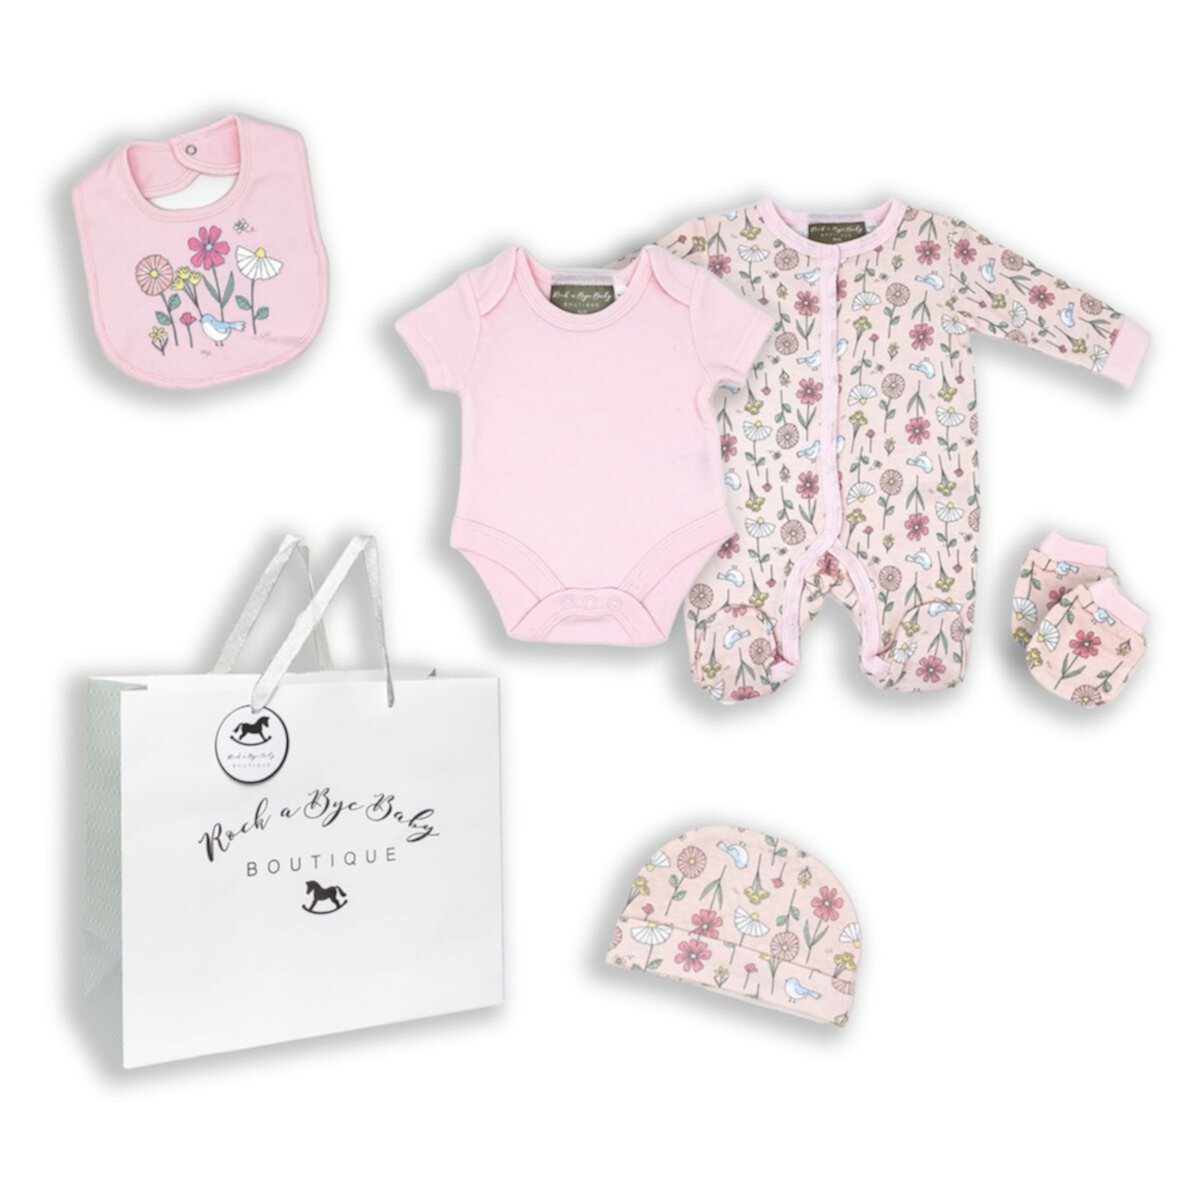 Baby Girls Birdy Floral 5 Pc Layette Gift Set in Mesh Bag Rock A Bye Baby Boutique